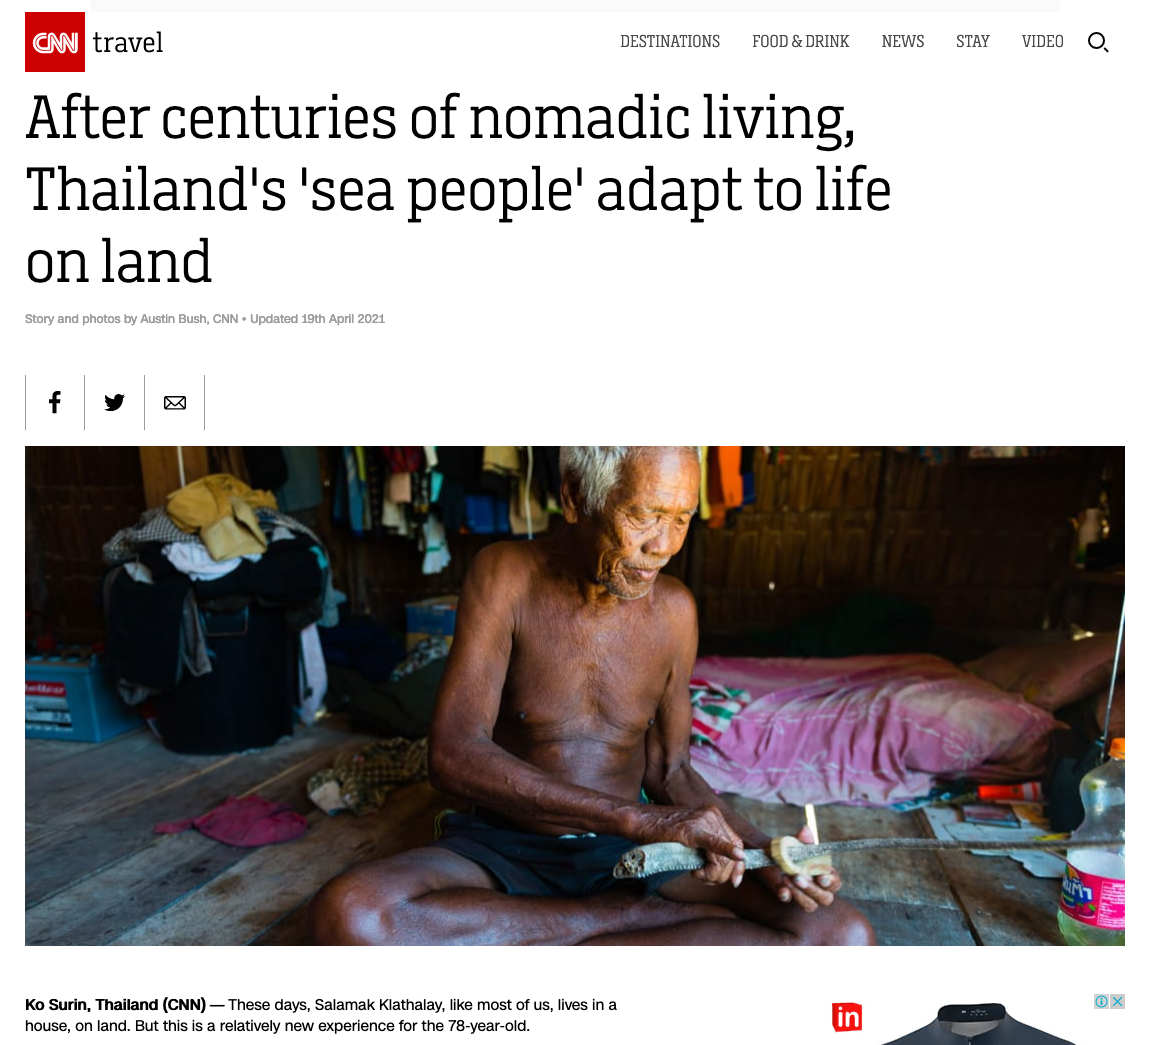  Photos &amp; text: “ After centuries of nomadic living, Thailand's 'sea people' adapt to life on land ,” CNN Travel 